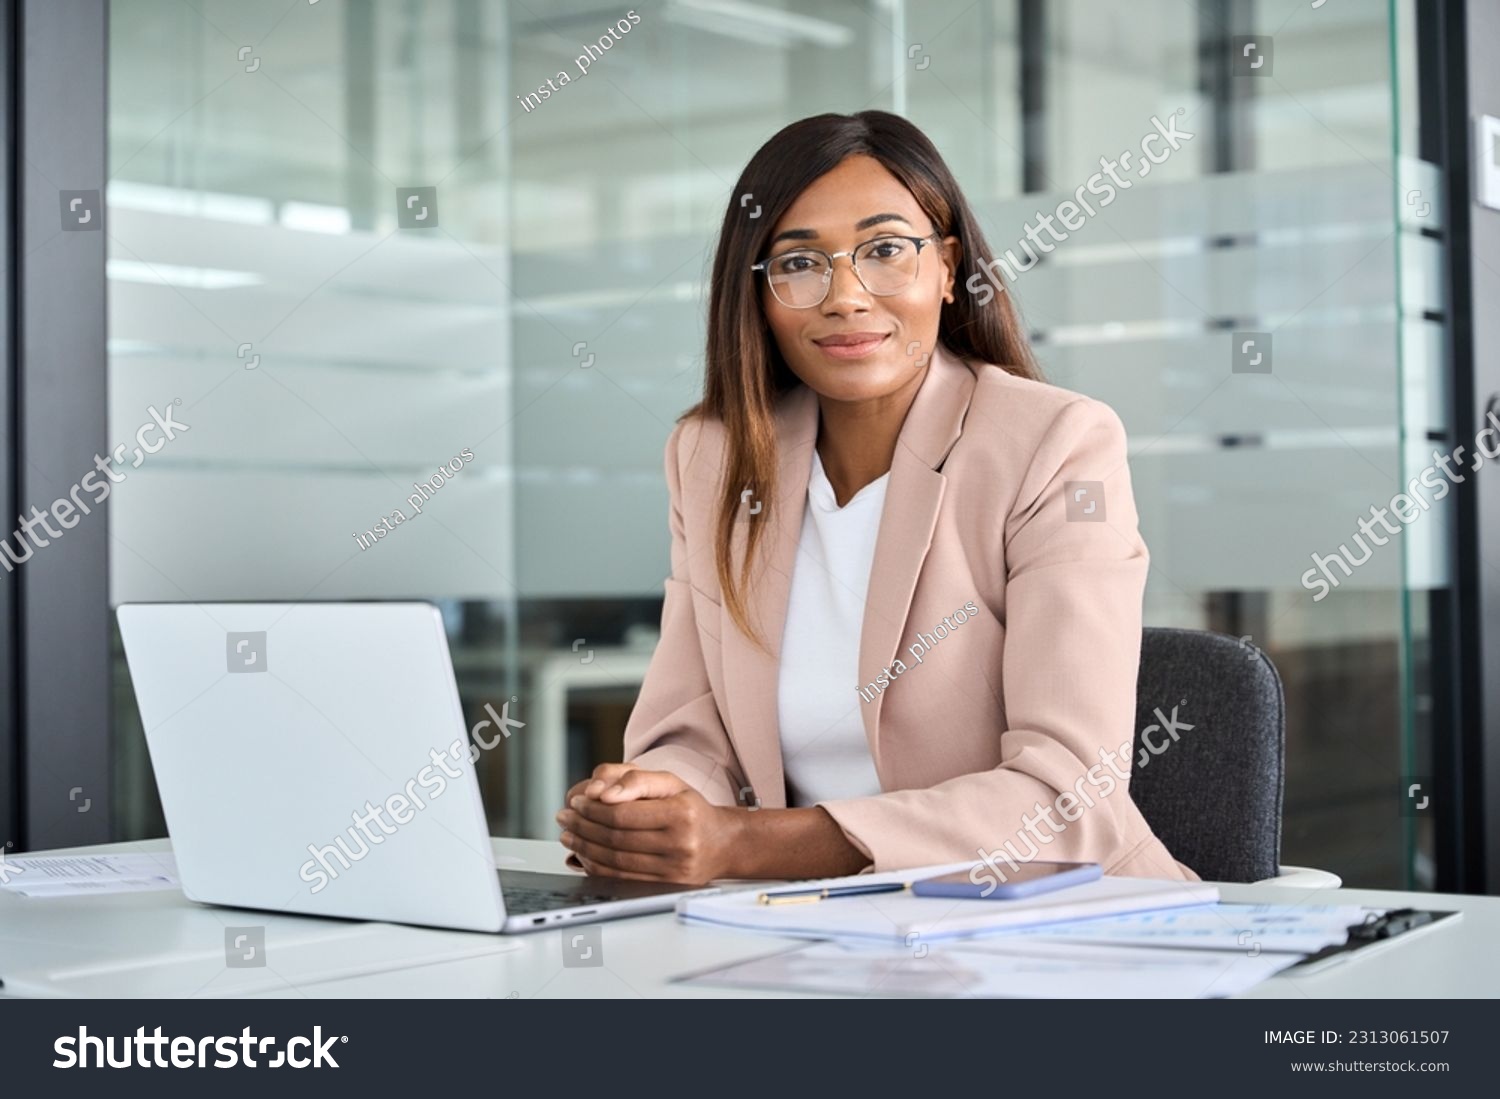 Confident young female lawyer, professional African American business woman company manager executive wearing suit glasses working on laptop in office sitting at desk looking at camera, portrait. #2313061507